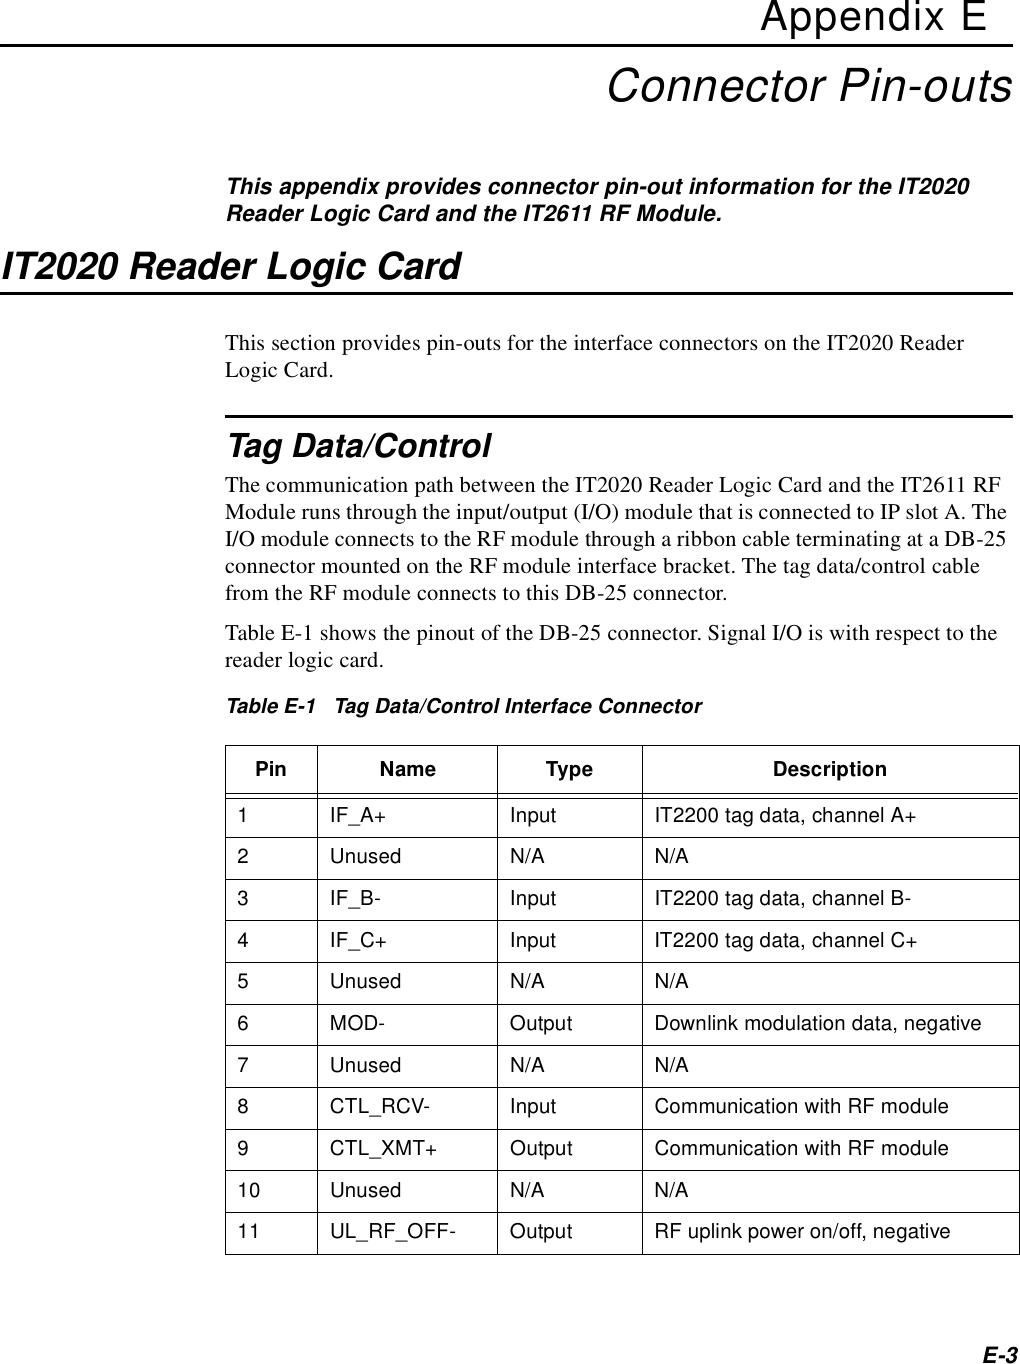 E-3Appendix EConnector Pin-outsThis appendix provides connector pin-out information for the IT2020 Reader Logic Card and the IT2611 RF Module.IT2020 Reader Logic CardThis section provides pin-outs for the interface connectors on the IT2020 Reader Logic Card.Tag Data/ControlThe communication path between the IT2020 Reader Logic Card and the IT2611 RF Module runs through the input/output (I/O) module that is connected to IP slot A. The I/O module connects to the RF module through a ribbon cable terminating at a DB-25 connector mounted on the RF module interface bracket. The tag data/control cable from the RF module connects to this DB-25 connector.Table E-1 shows the pinout of the DB-25 connector. Signal I/O is with respect to the reader logic card.Table E-1   Tag Data/Control Interface ConnectorPin Name Type Description1 IF_A+ Input IT2200 tag data, channel A+2 Unused N/A N/A3 IF_B- Input IT2200 tag data, channel B-4 IF_C+ Input IT2200 tag data, channel C+5 Unused N/A N/A6 MOD- Output Downlink modulation data, negative7 Unused N/A N/A8 CTL_RCV- Input Communication with RF module9 CTL_XMT+ Output Communication with RF module10 Unused N/A N/A11 UL_RF_OFF- Output RF uplink power on/off, negative